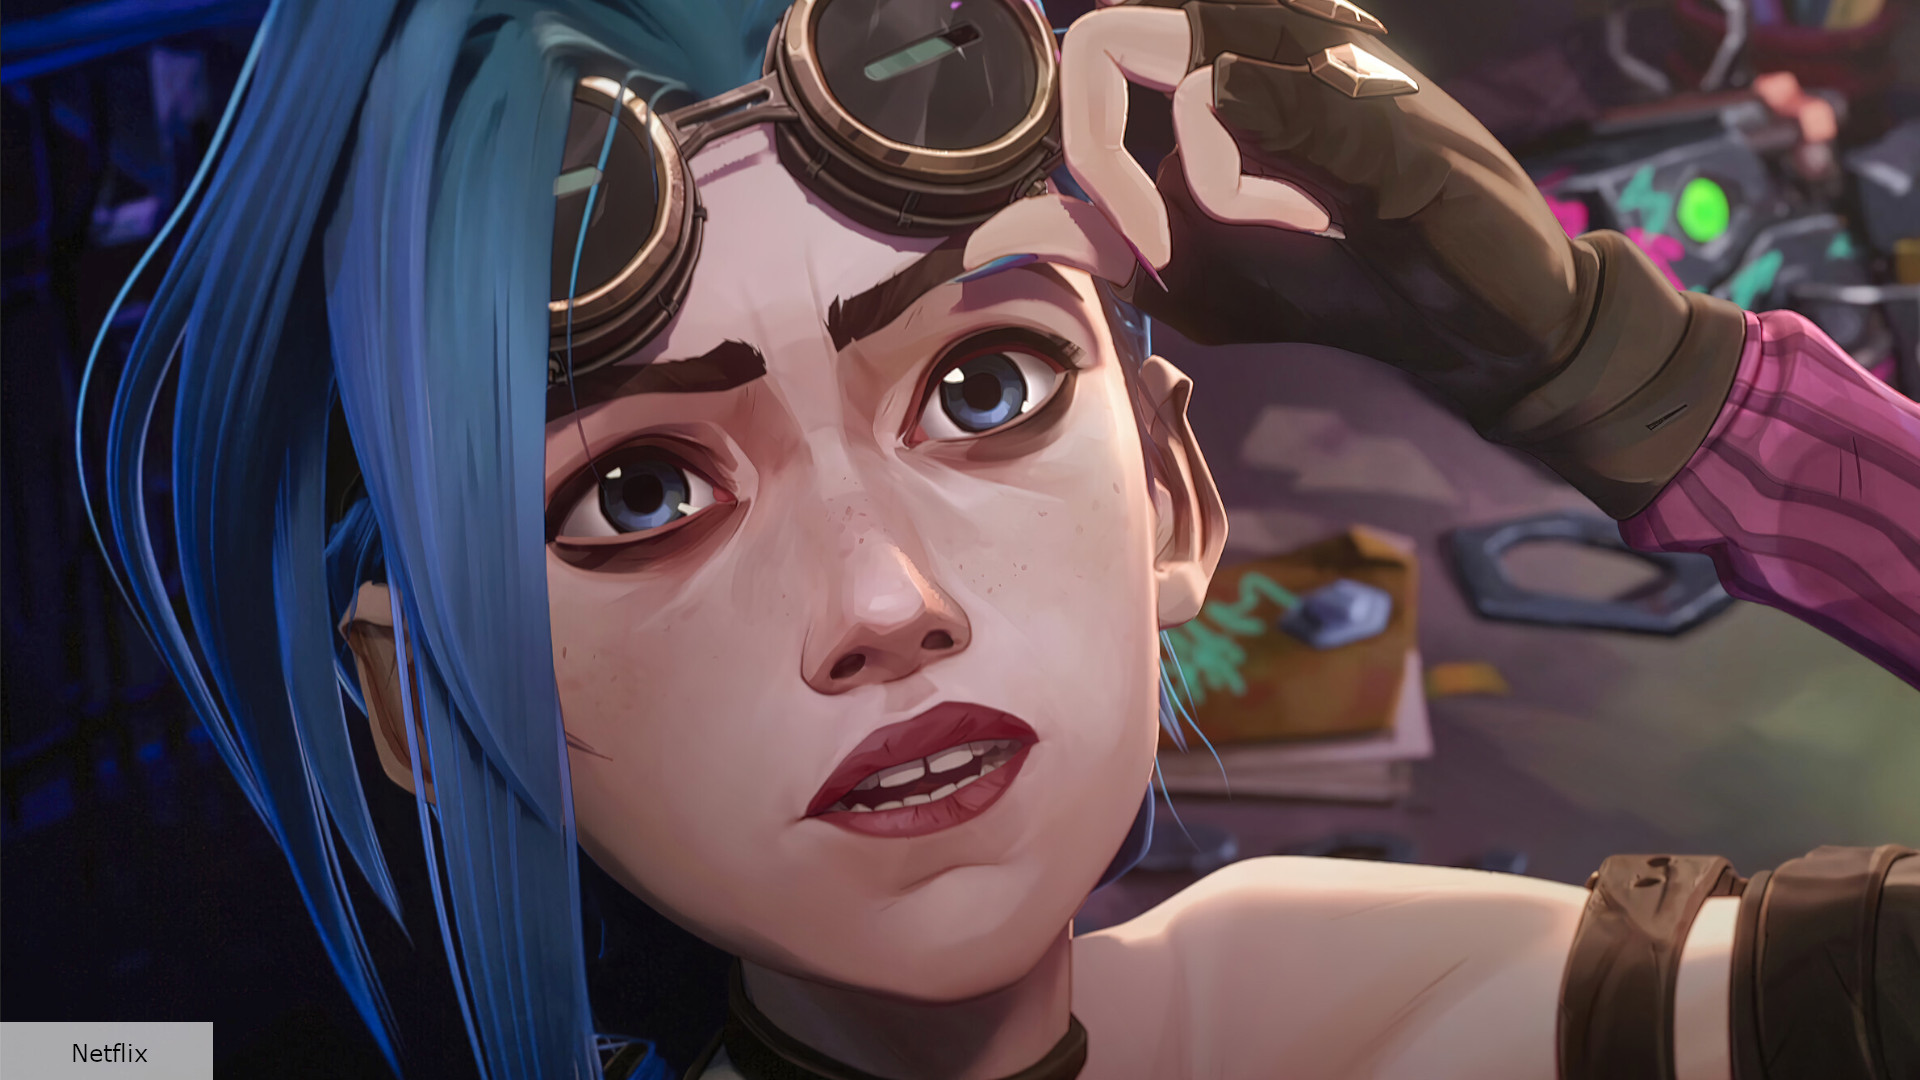 How old is Jinx in Arcane?